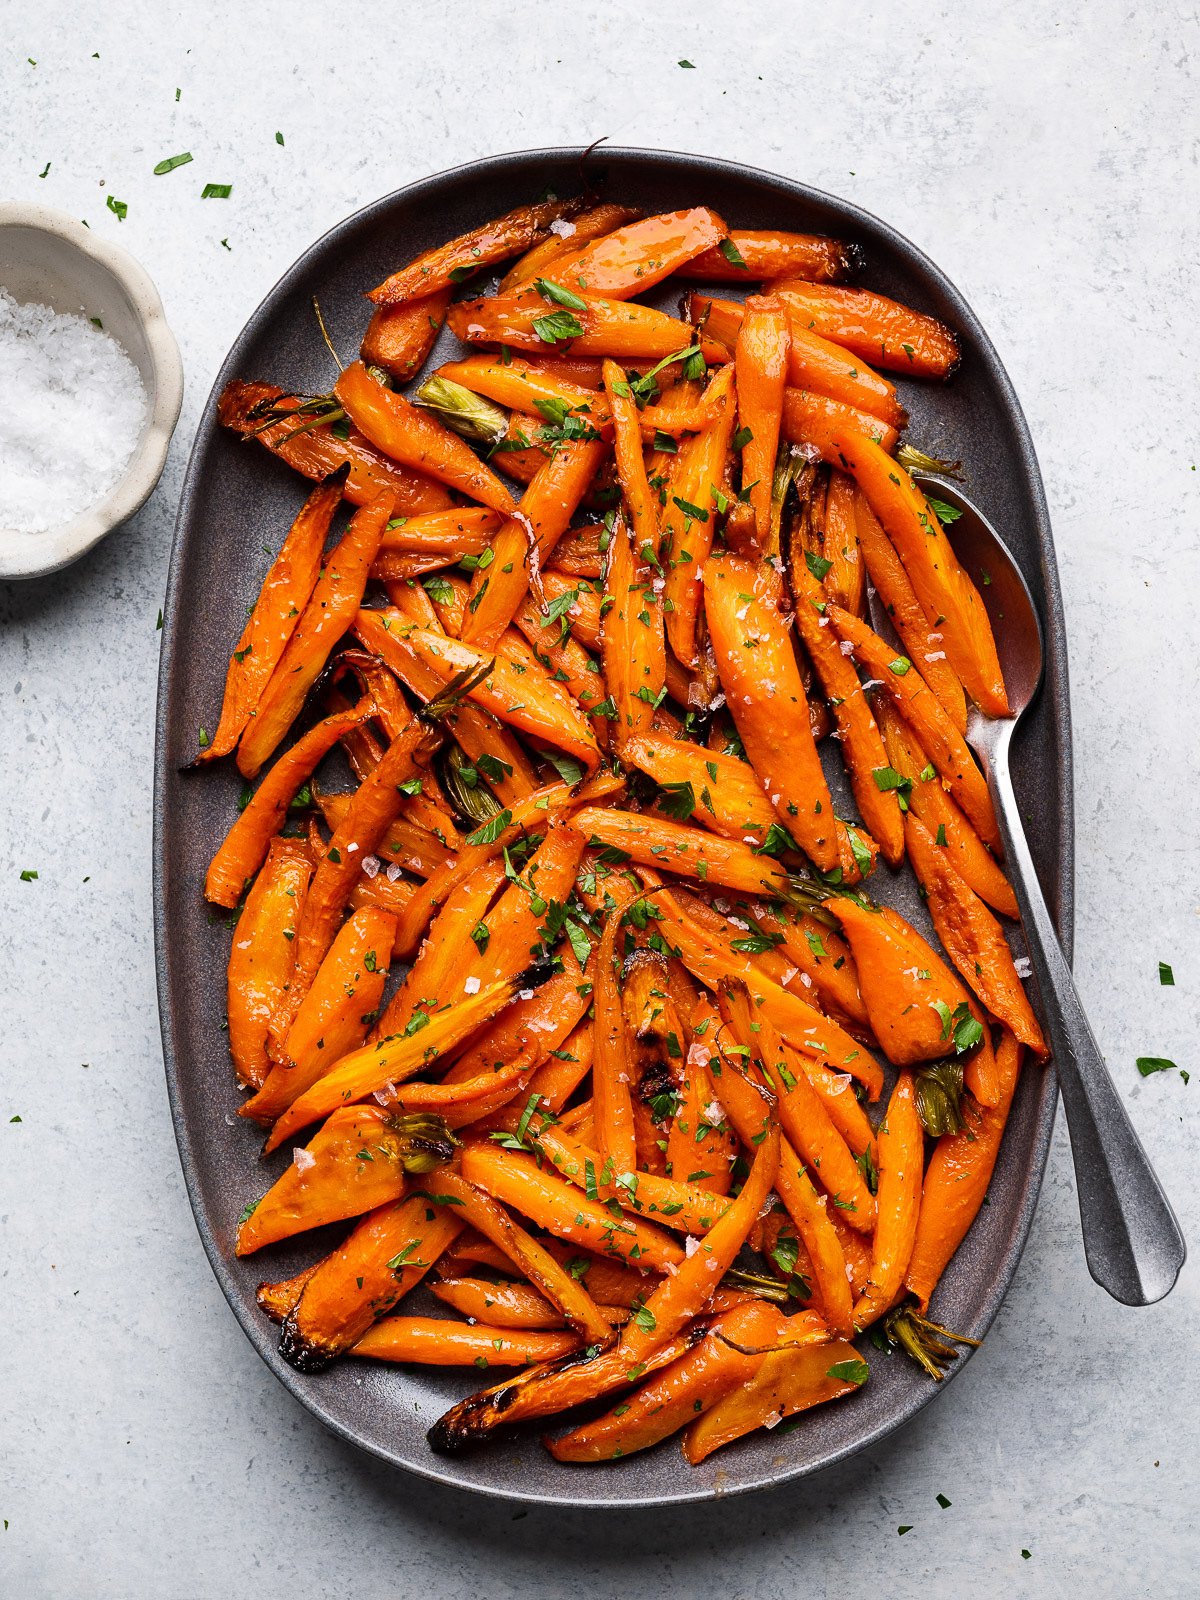 Honey Maple Roasted Carrots served on platter garnished with parsley and flaky salt